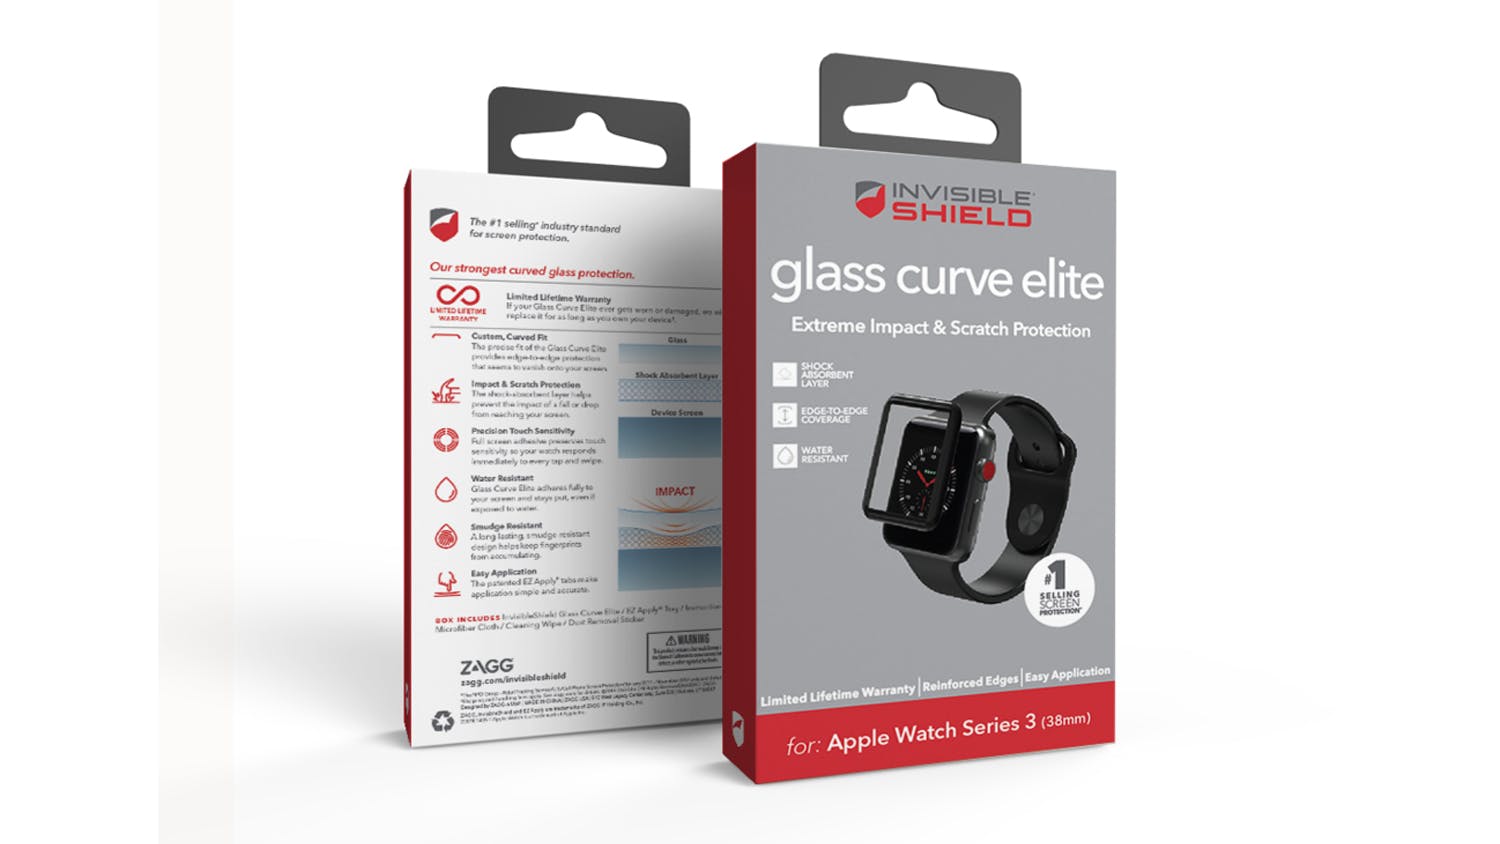 Zagg Invisibleshield Glass Curve Elite for Apple Watch Series 3 - 38mm